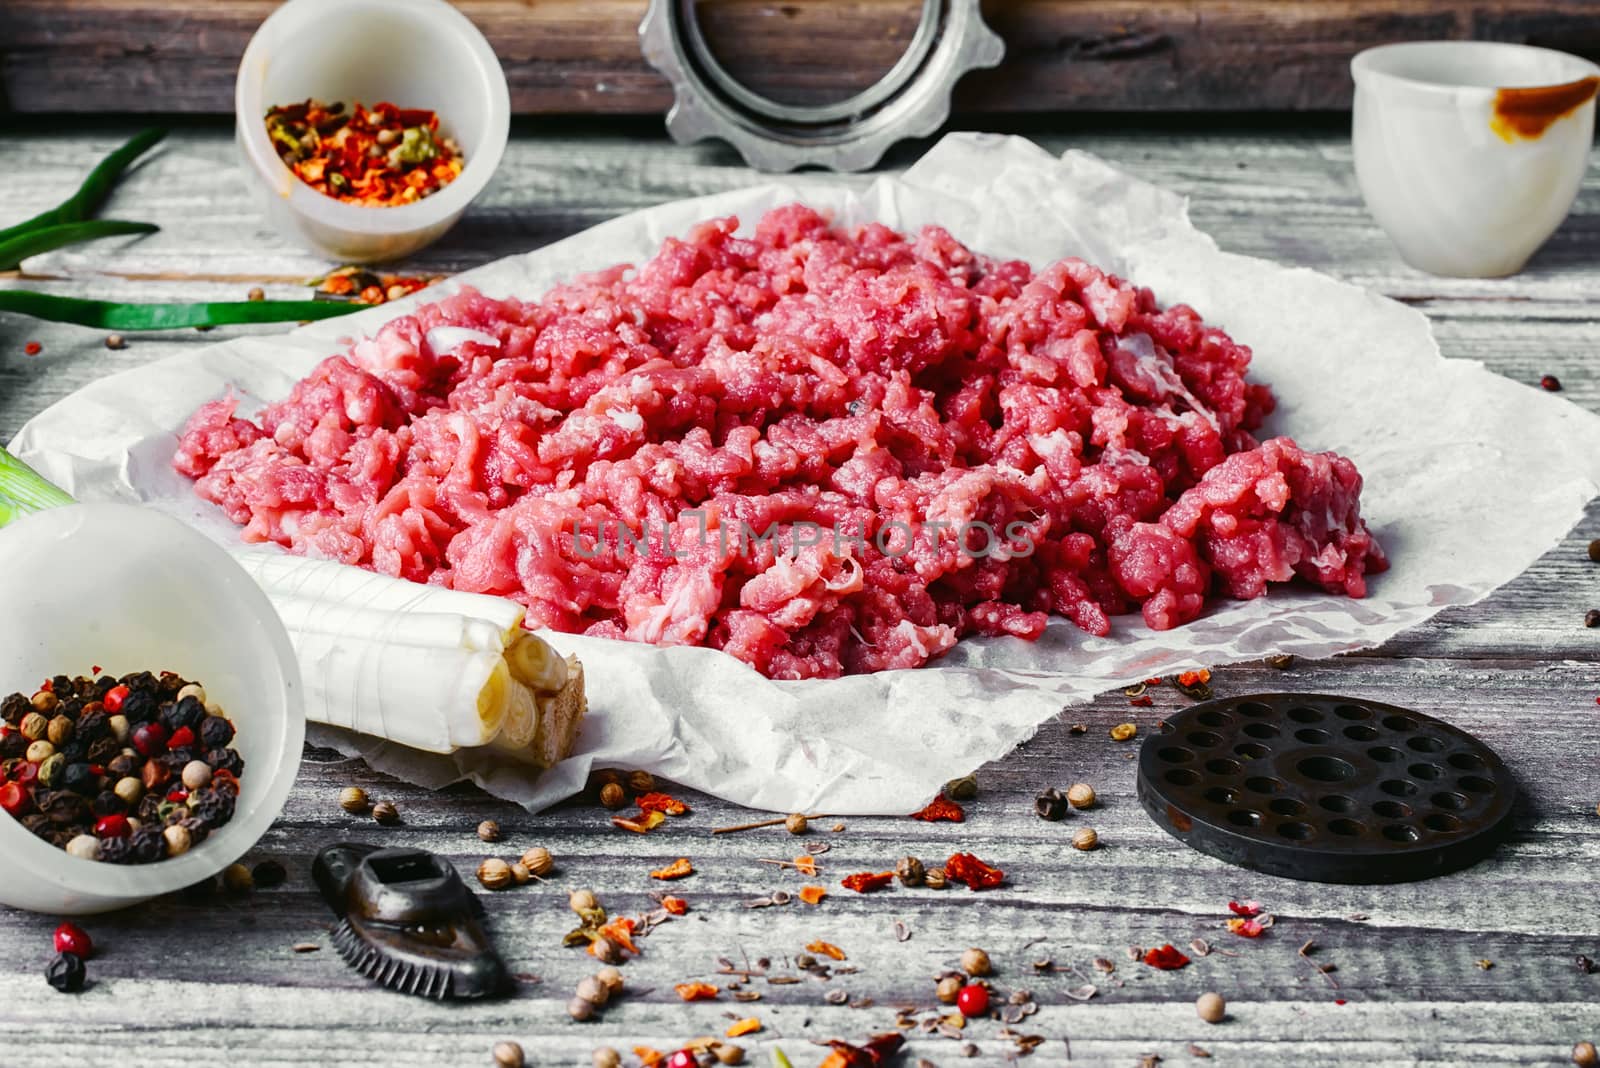 Fresh ground beef with spices on paper for baking